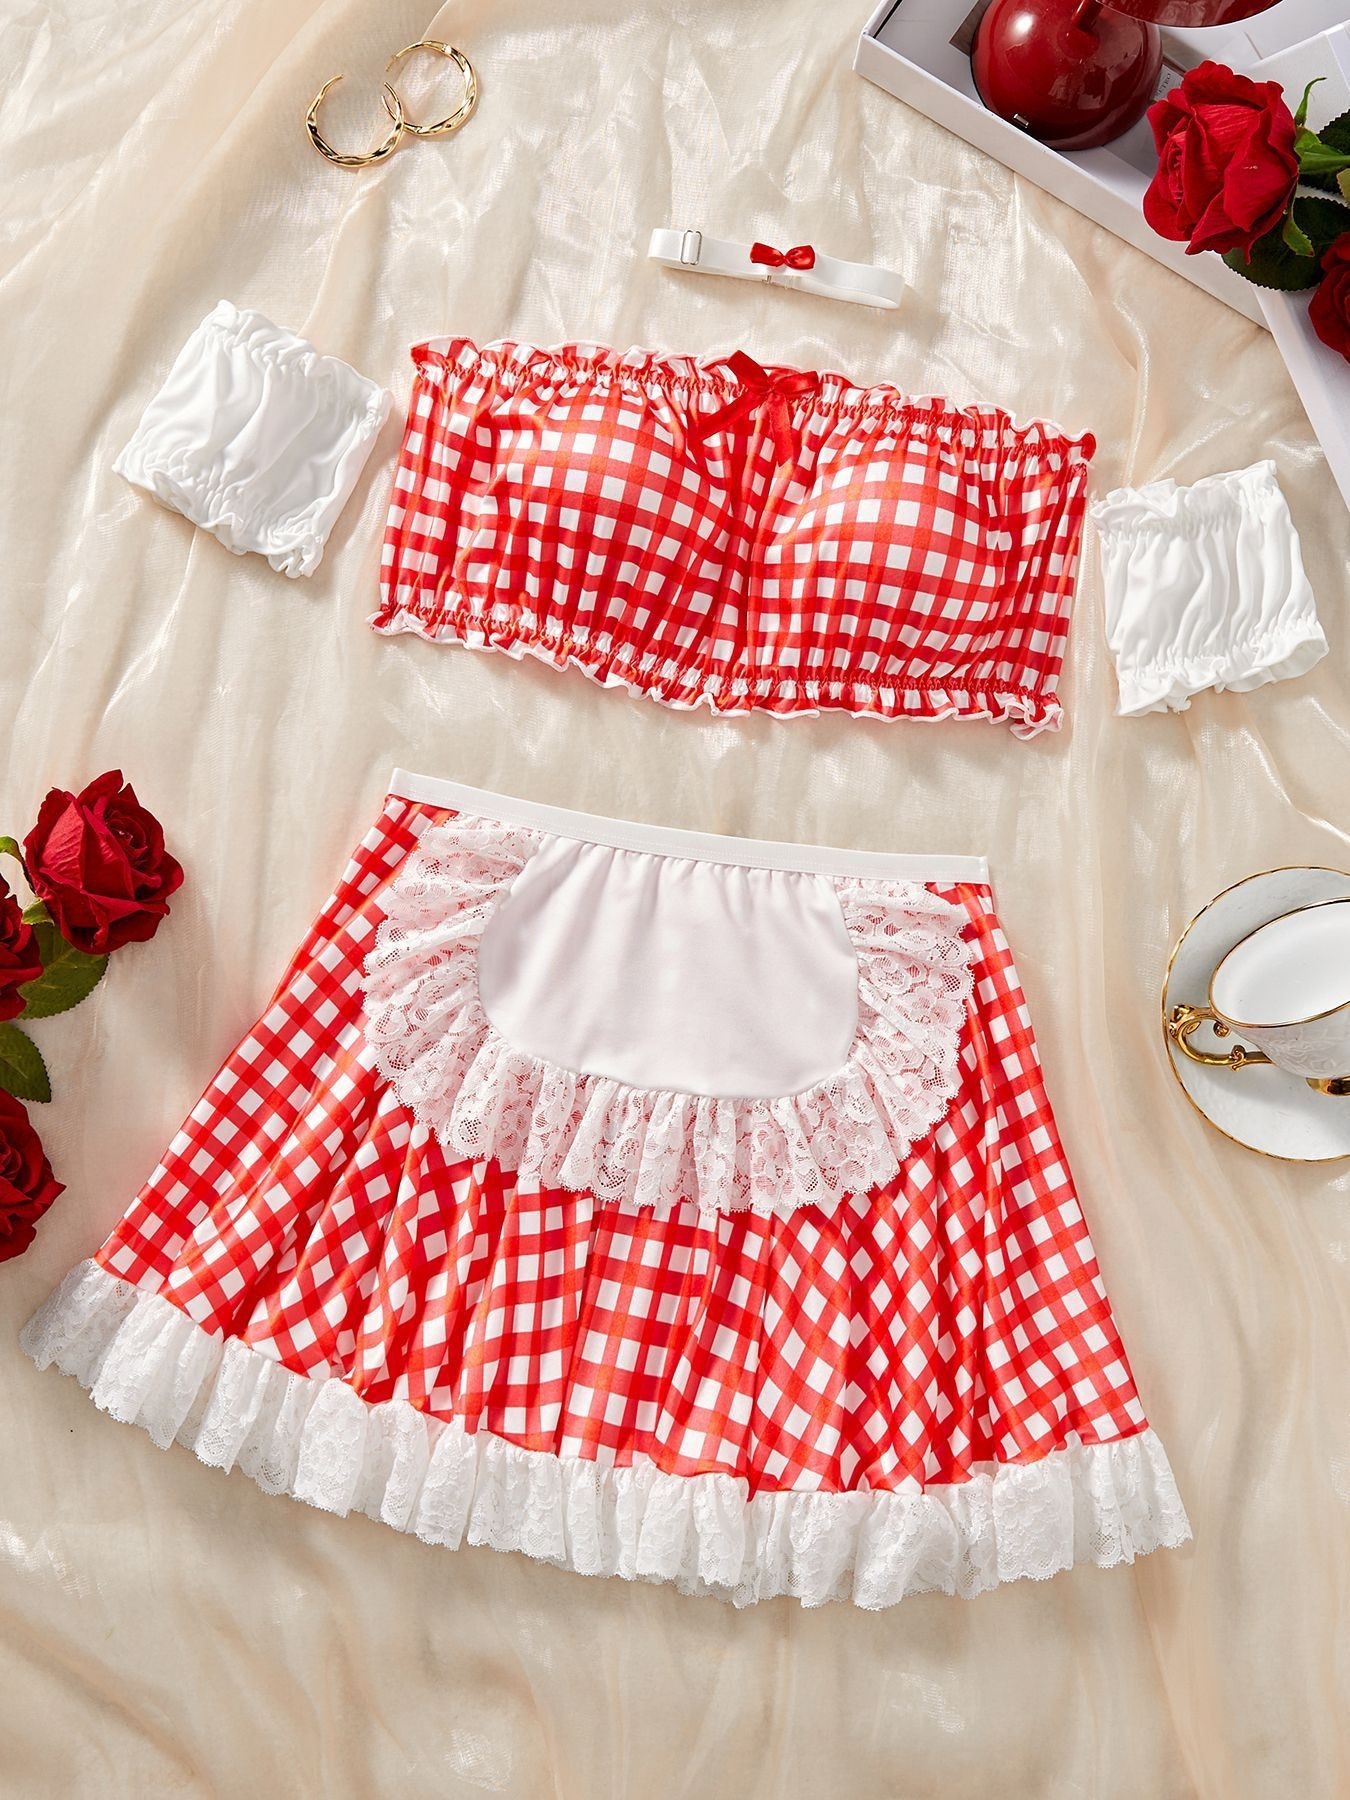 Red Plaid Maid Costume with Stockings-SexBodyShop